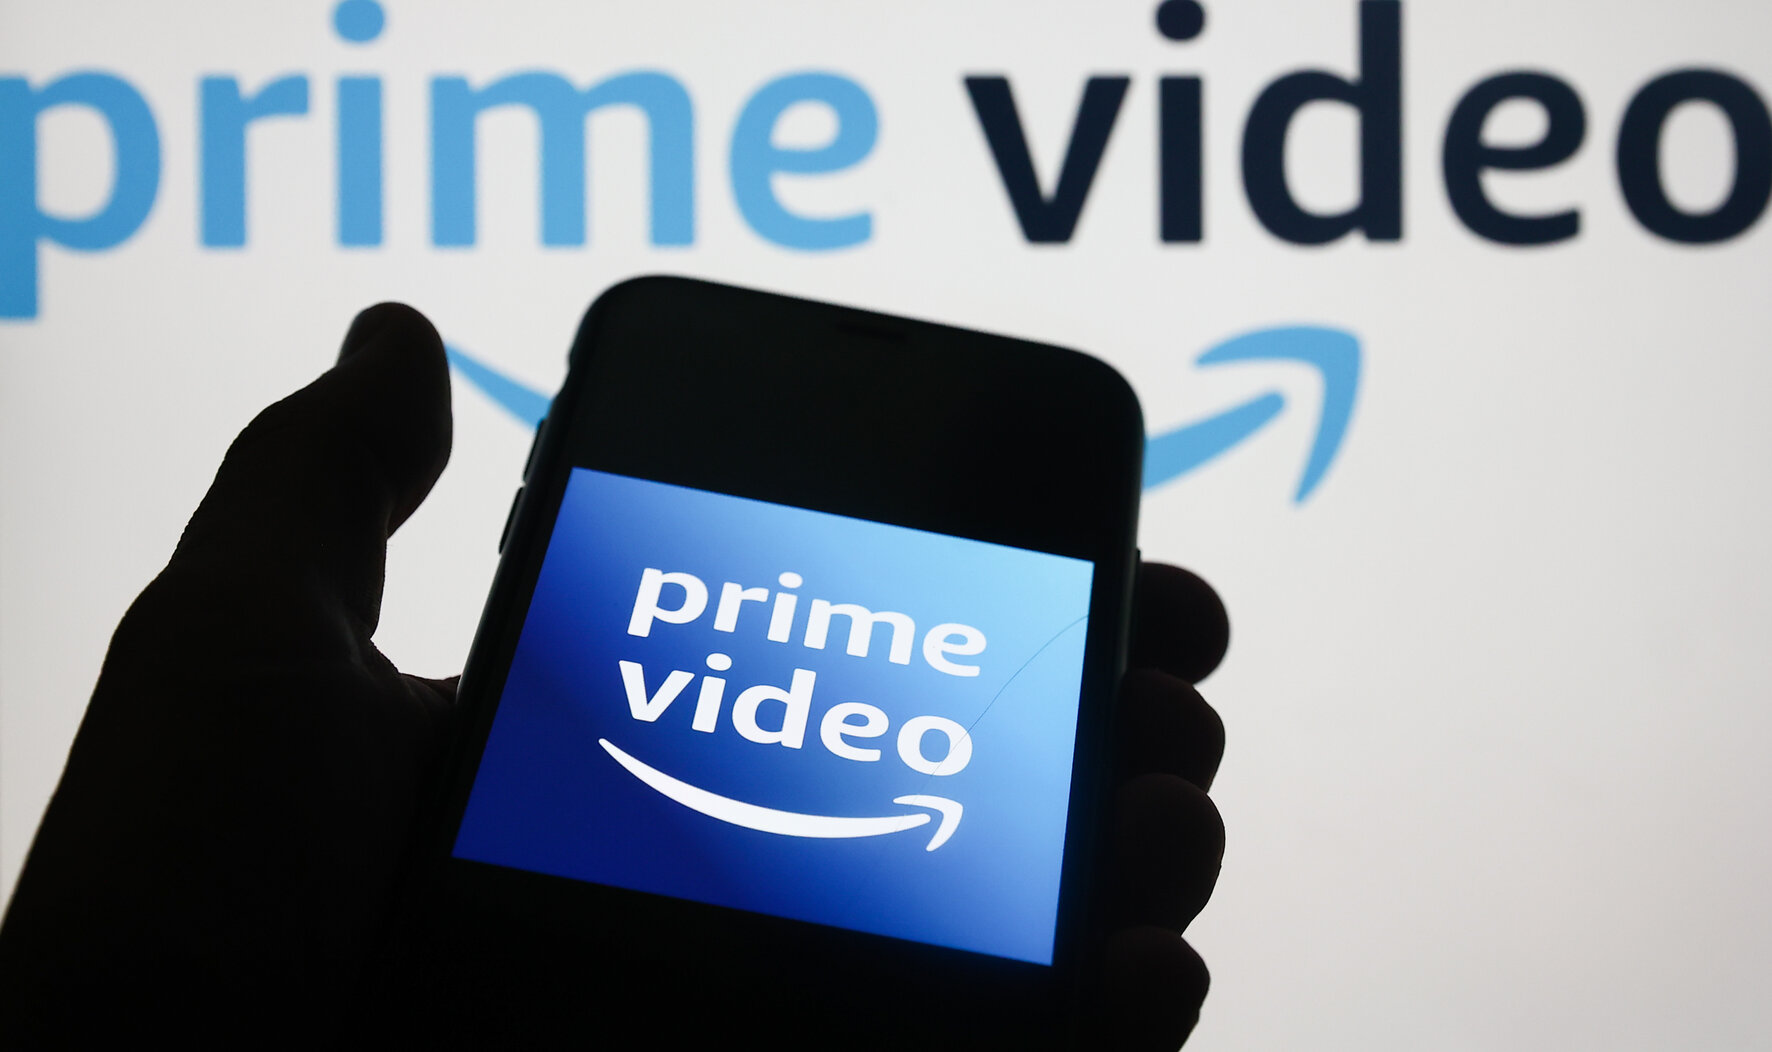 Go ahead Prime Video, launch an ad-supported tier - see if I care